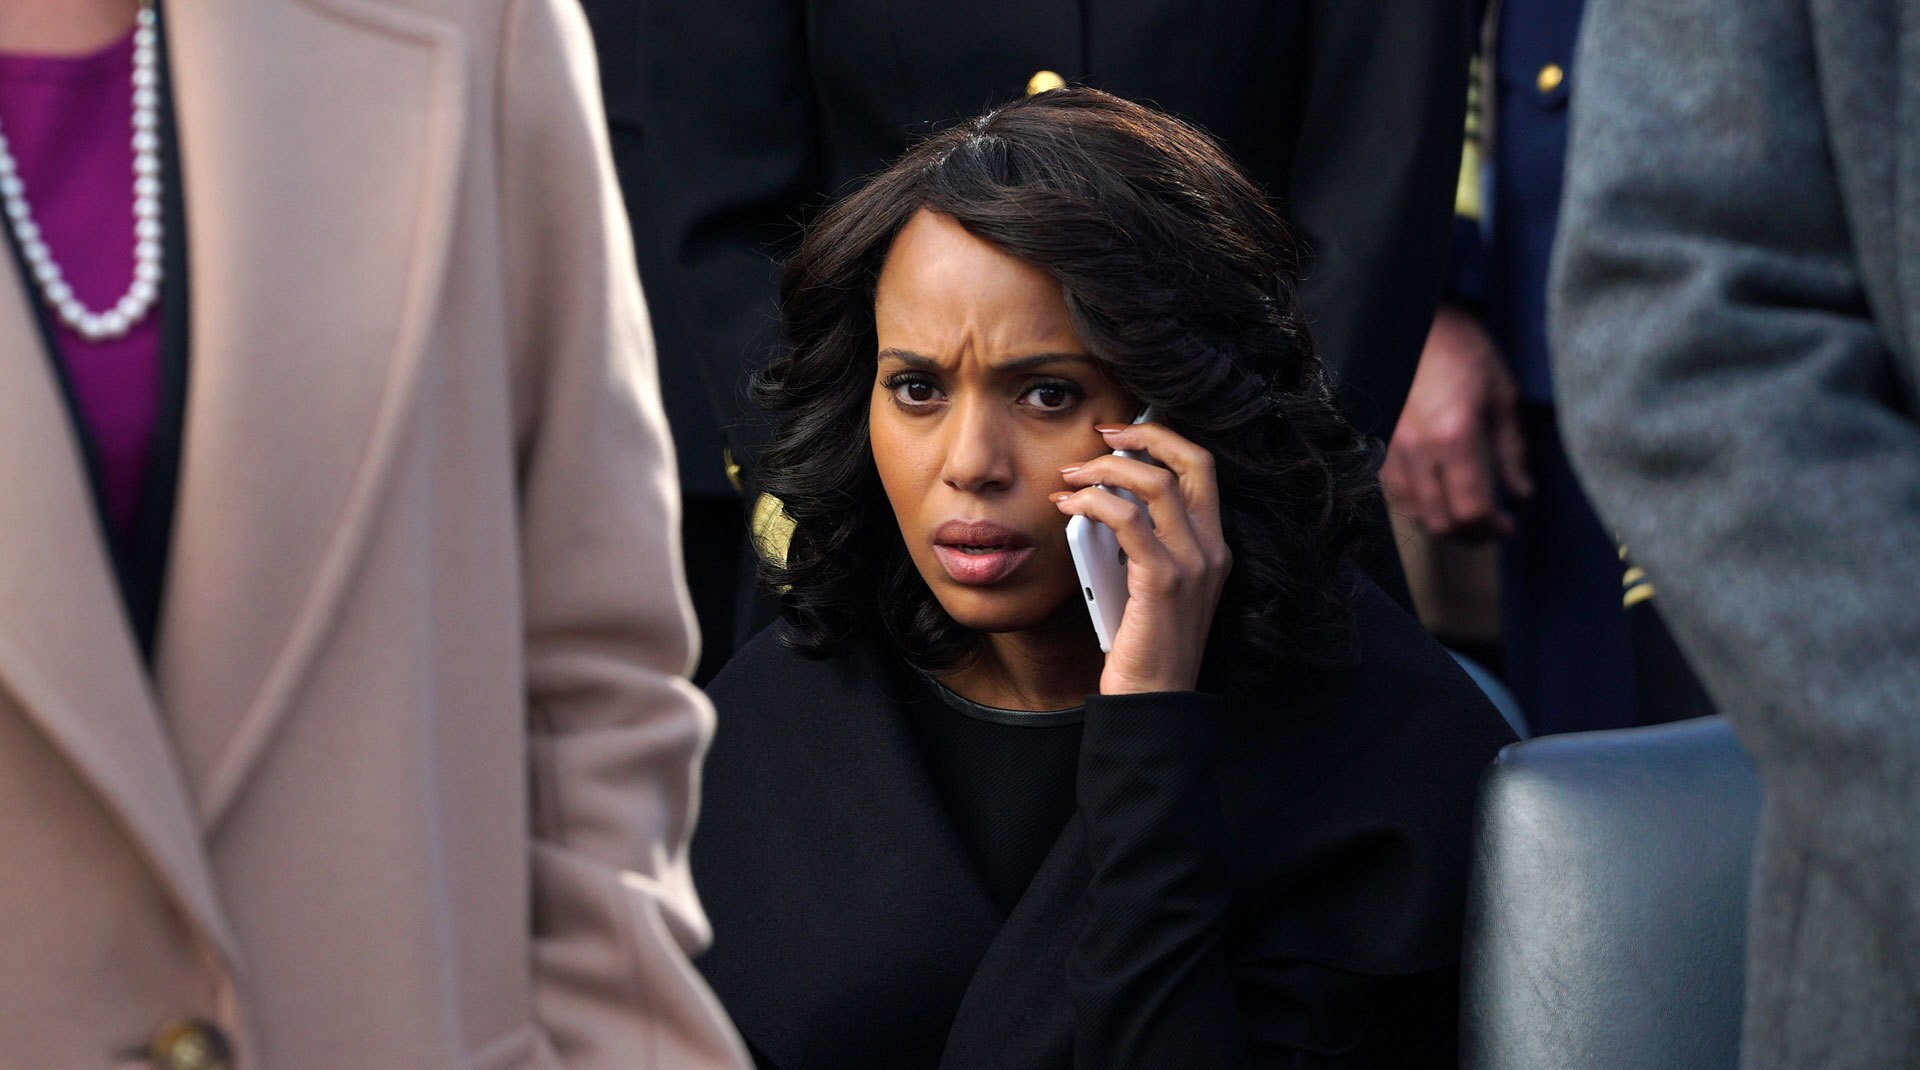 A still image from Scandal